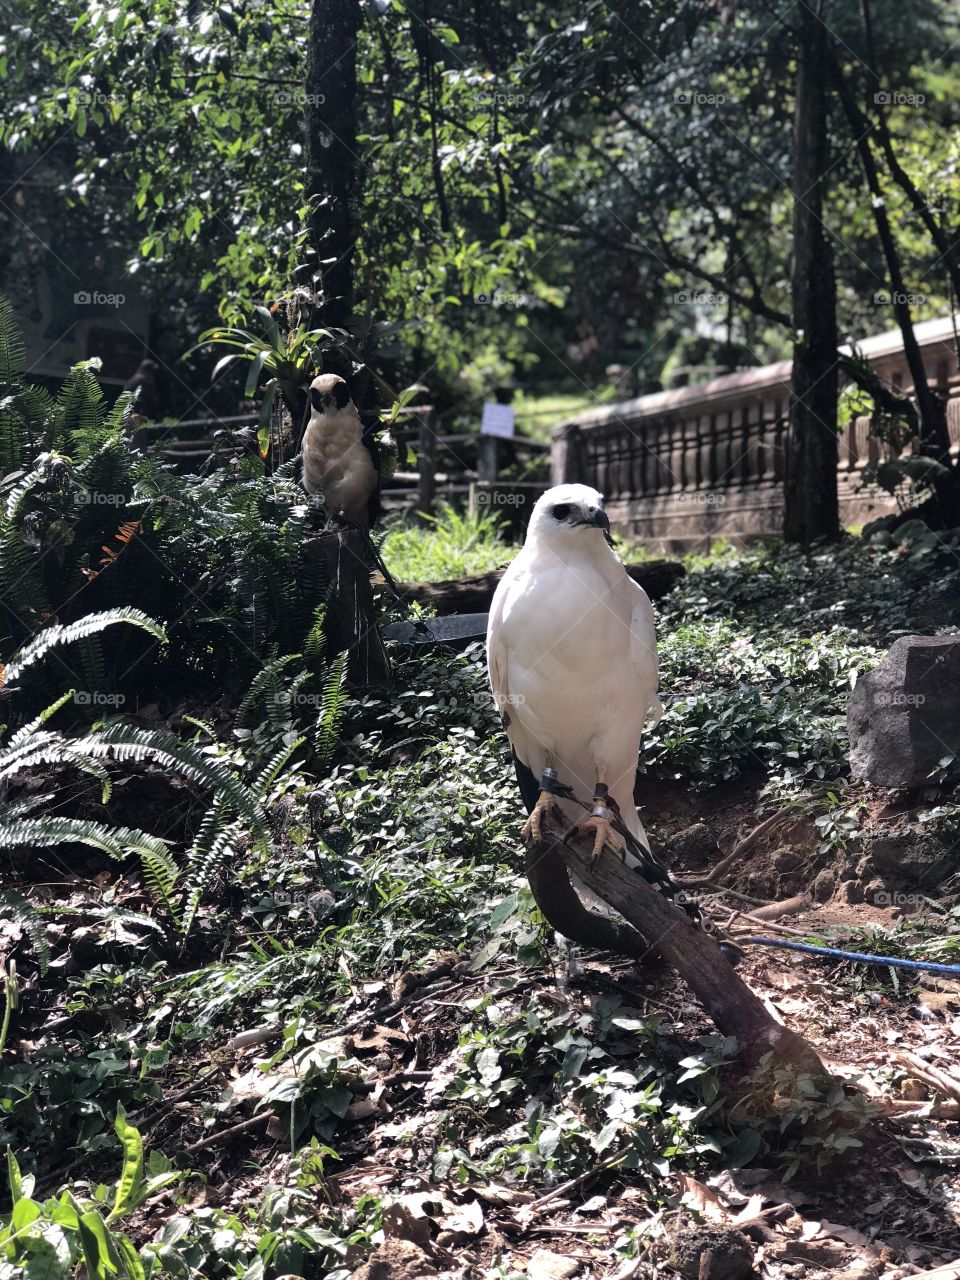 Hawk Eye. While hiking in Macuiltépetl in Jalapa Mexico I came across a small museum and that’s where I spotted this Snow Falcon. In the background you can spot a white Owl.